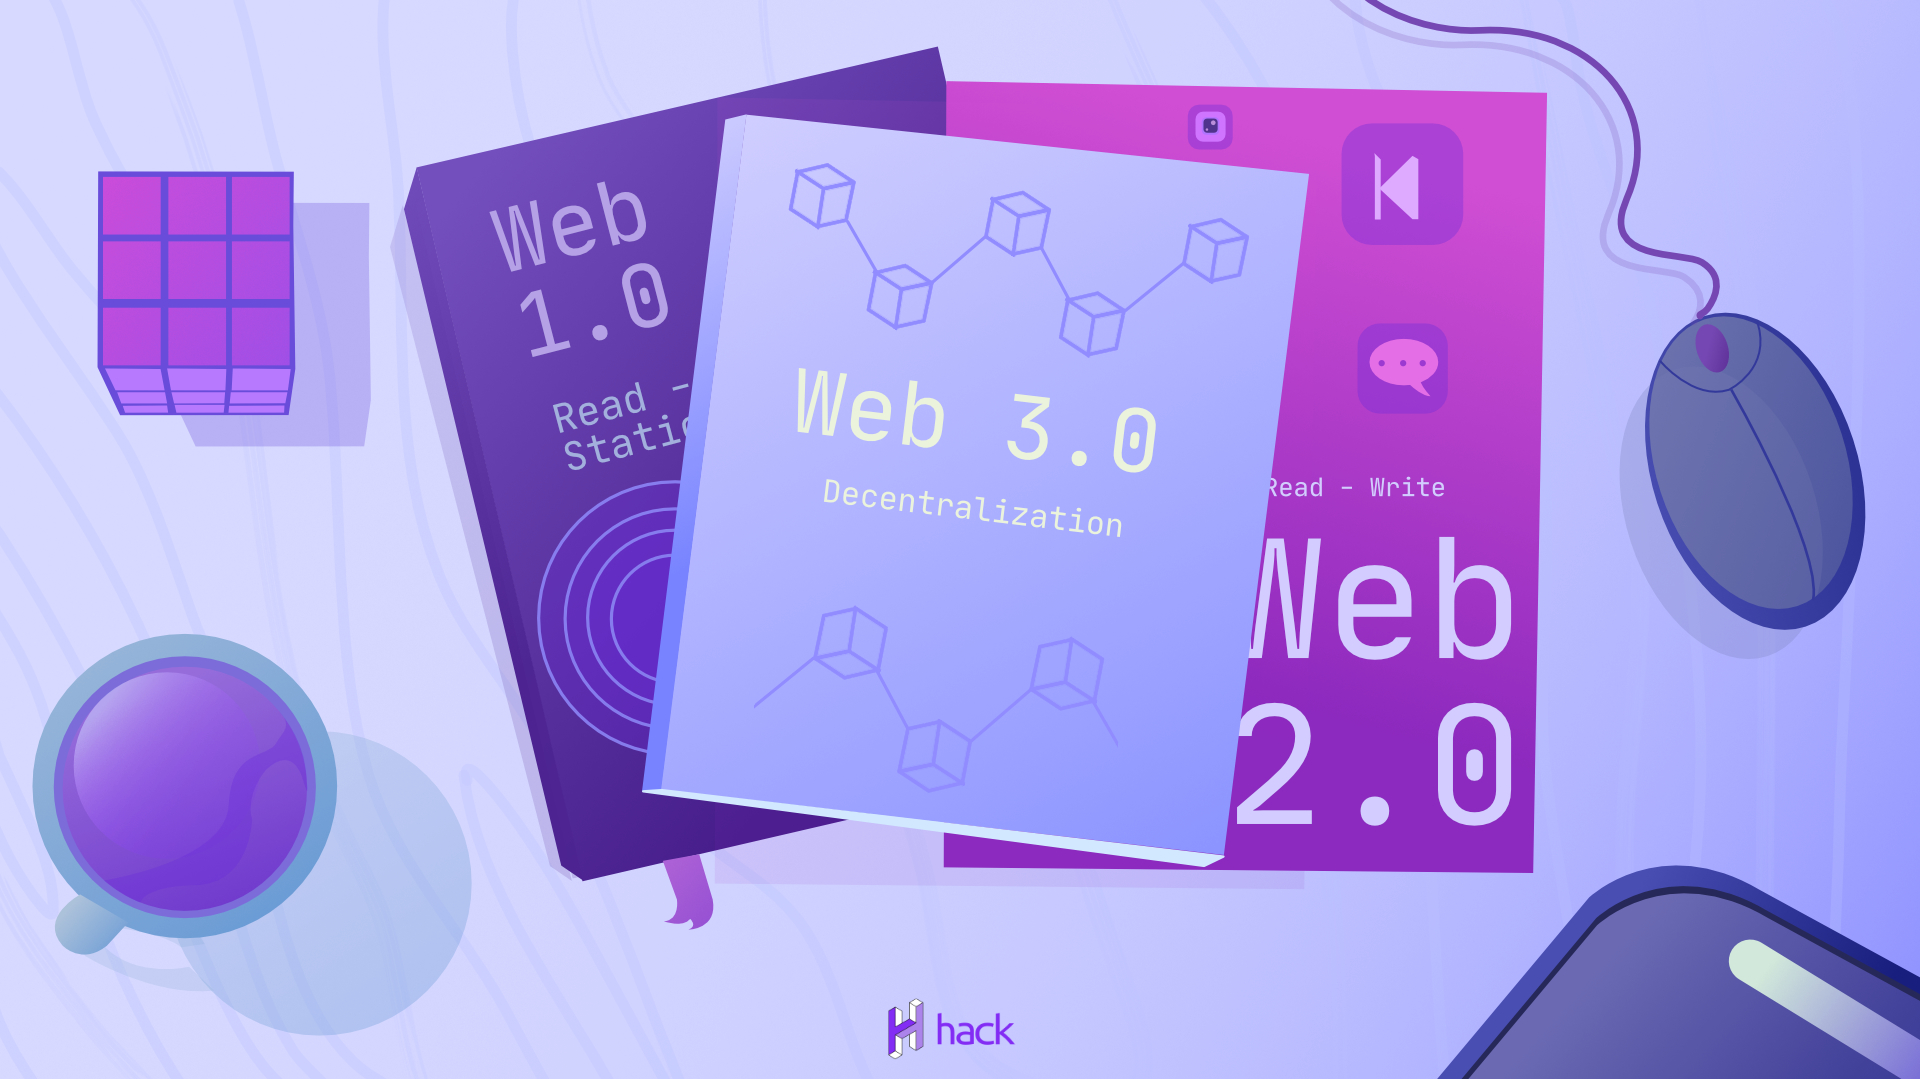 Cover Image for Web 1.0; Web 2.0; Web 3.0 – Evolution of the net